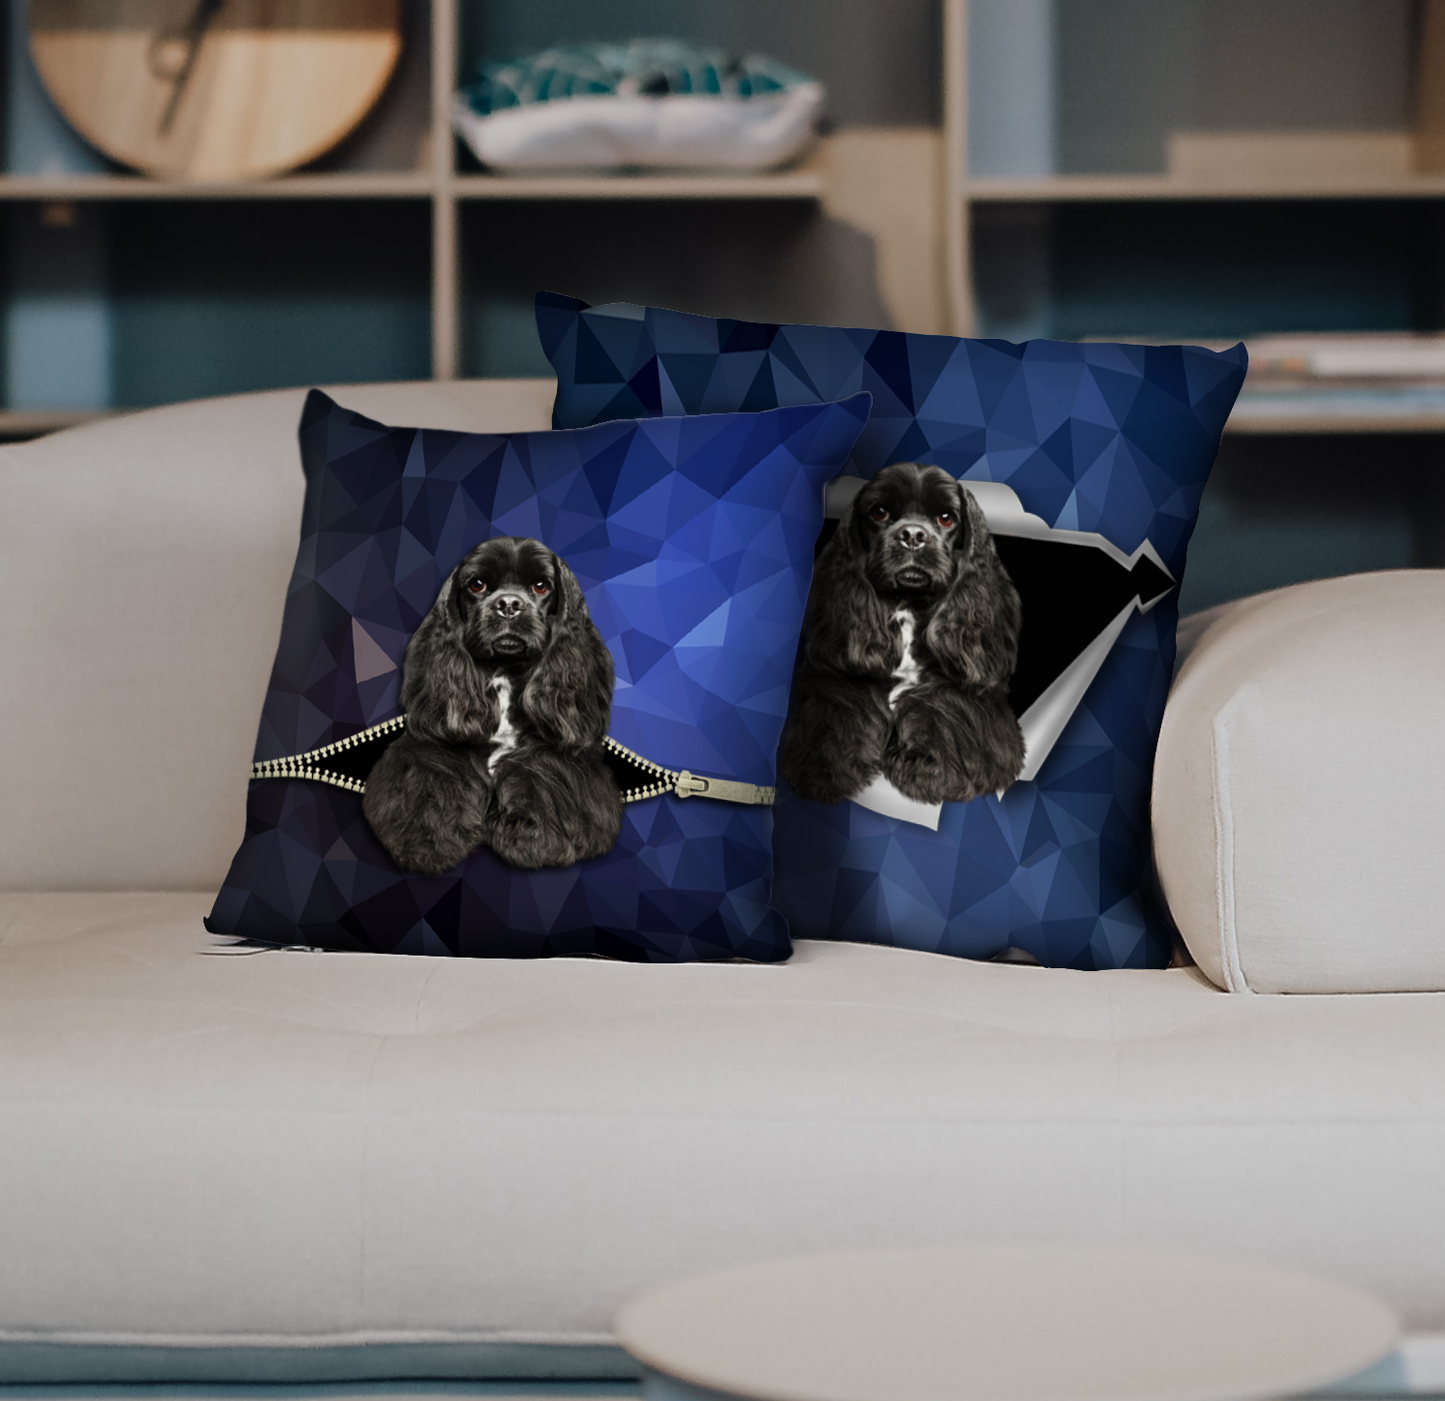 They Steal Your Couch - American Cocker Spaniel Pillow Cases V1 (Set of 2)